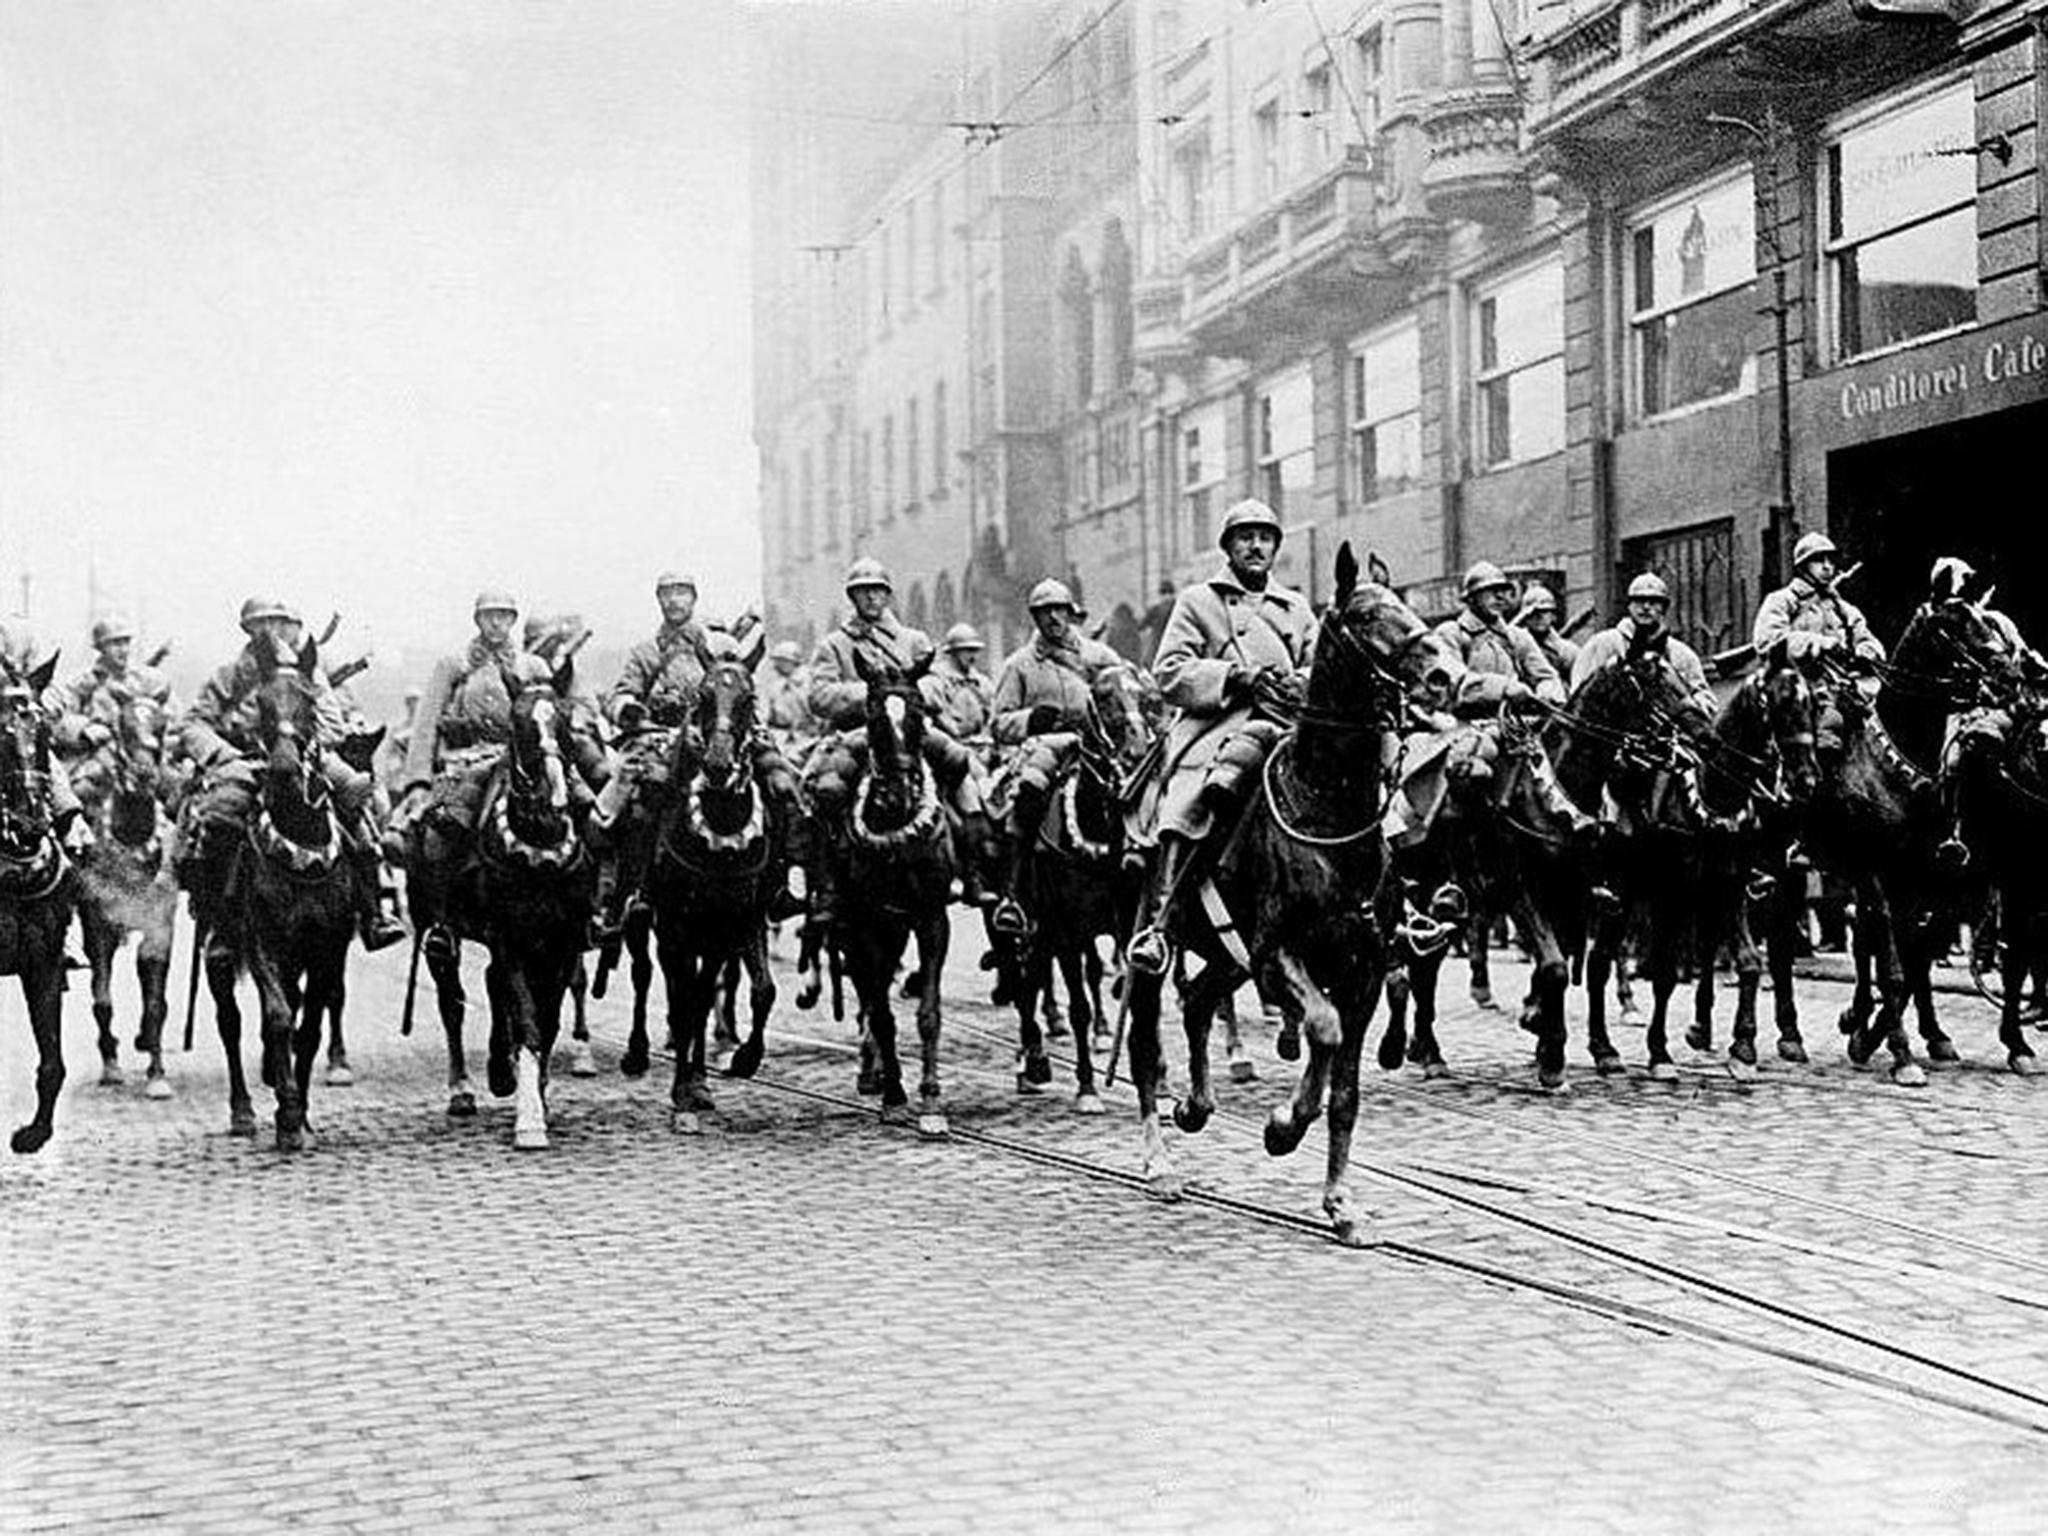 French troops enter Essen during the Ruhr occupation in 1923